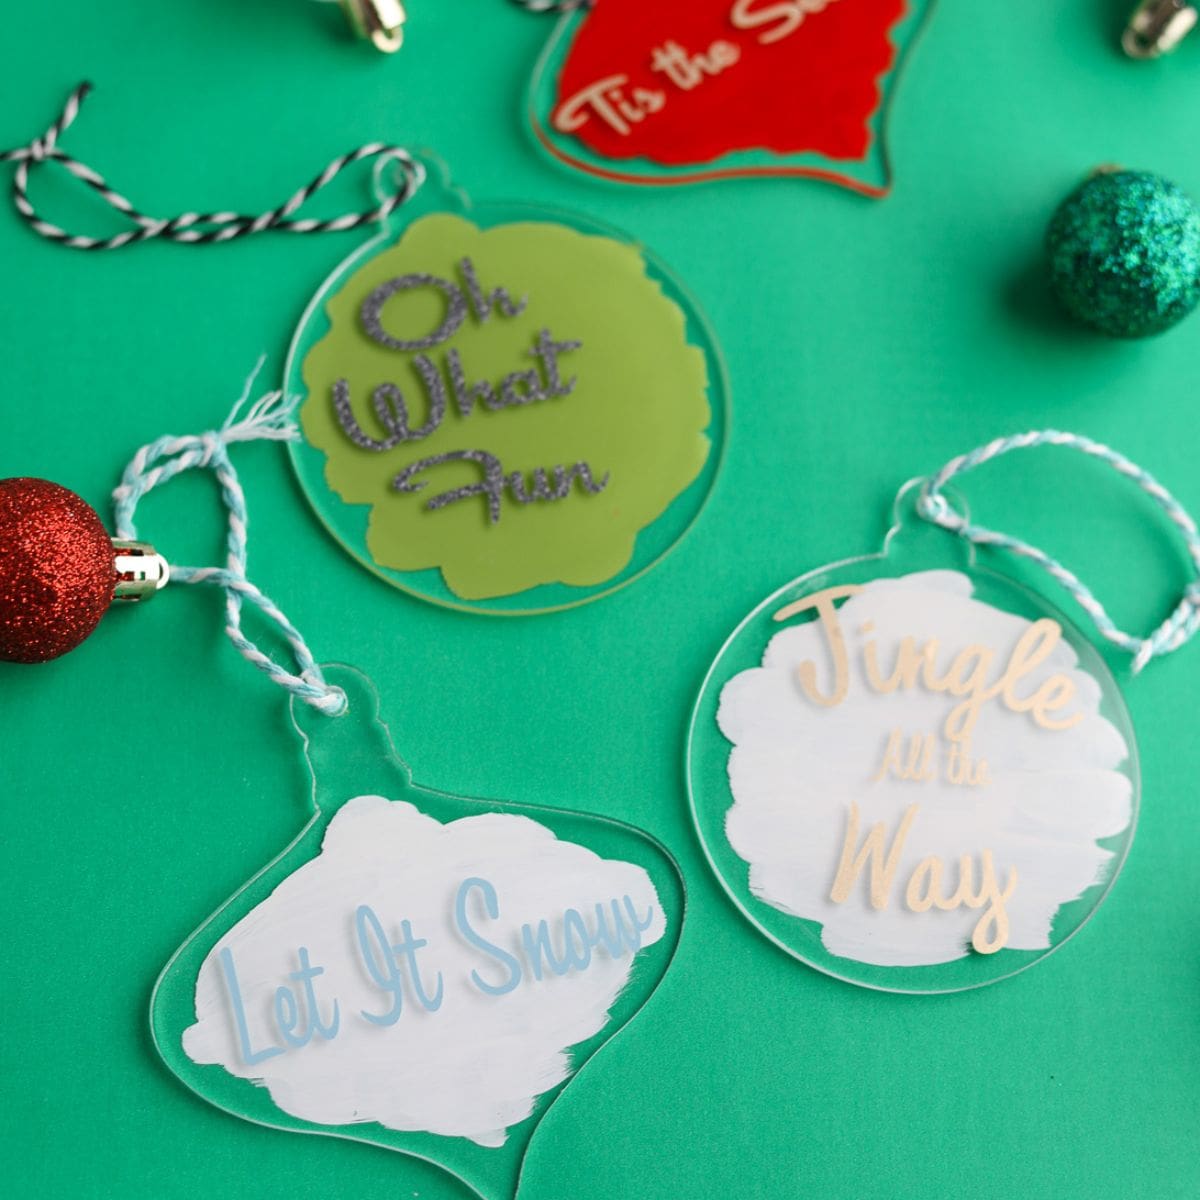 Easy to Make Acrylic Ornaments with Vinyl